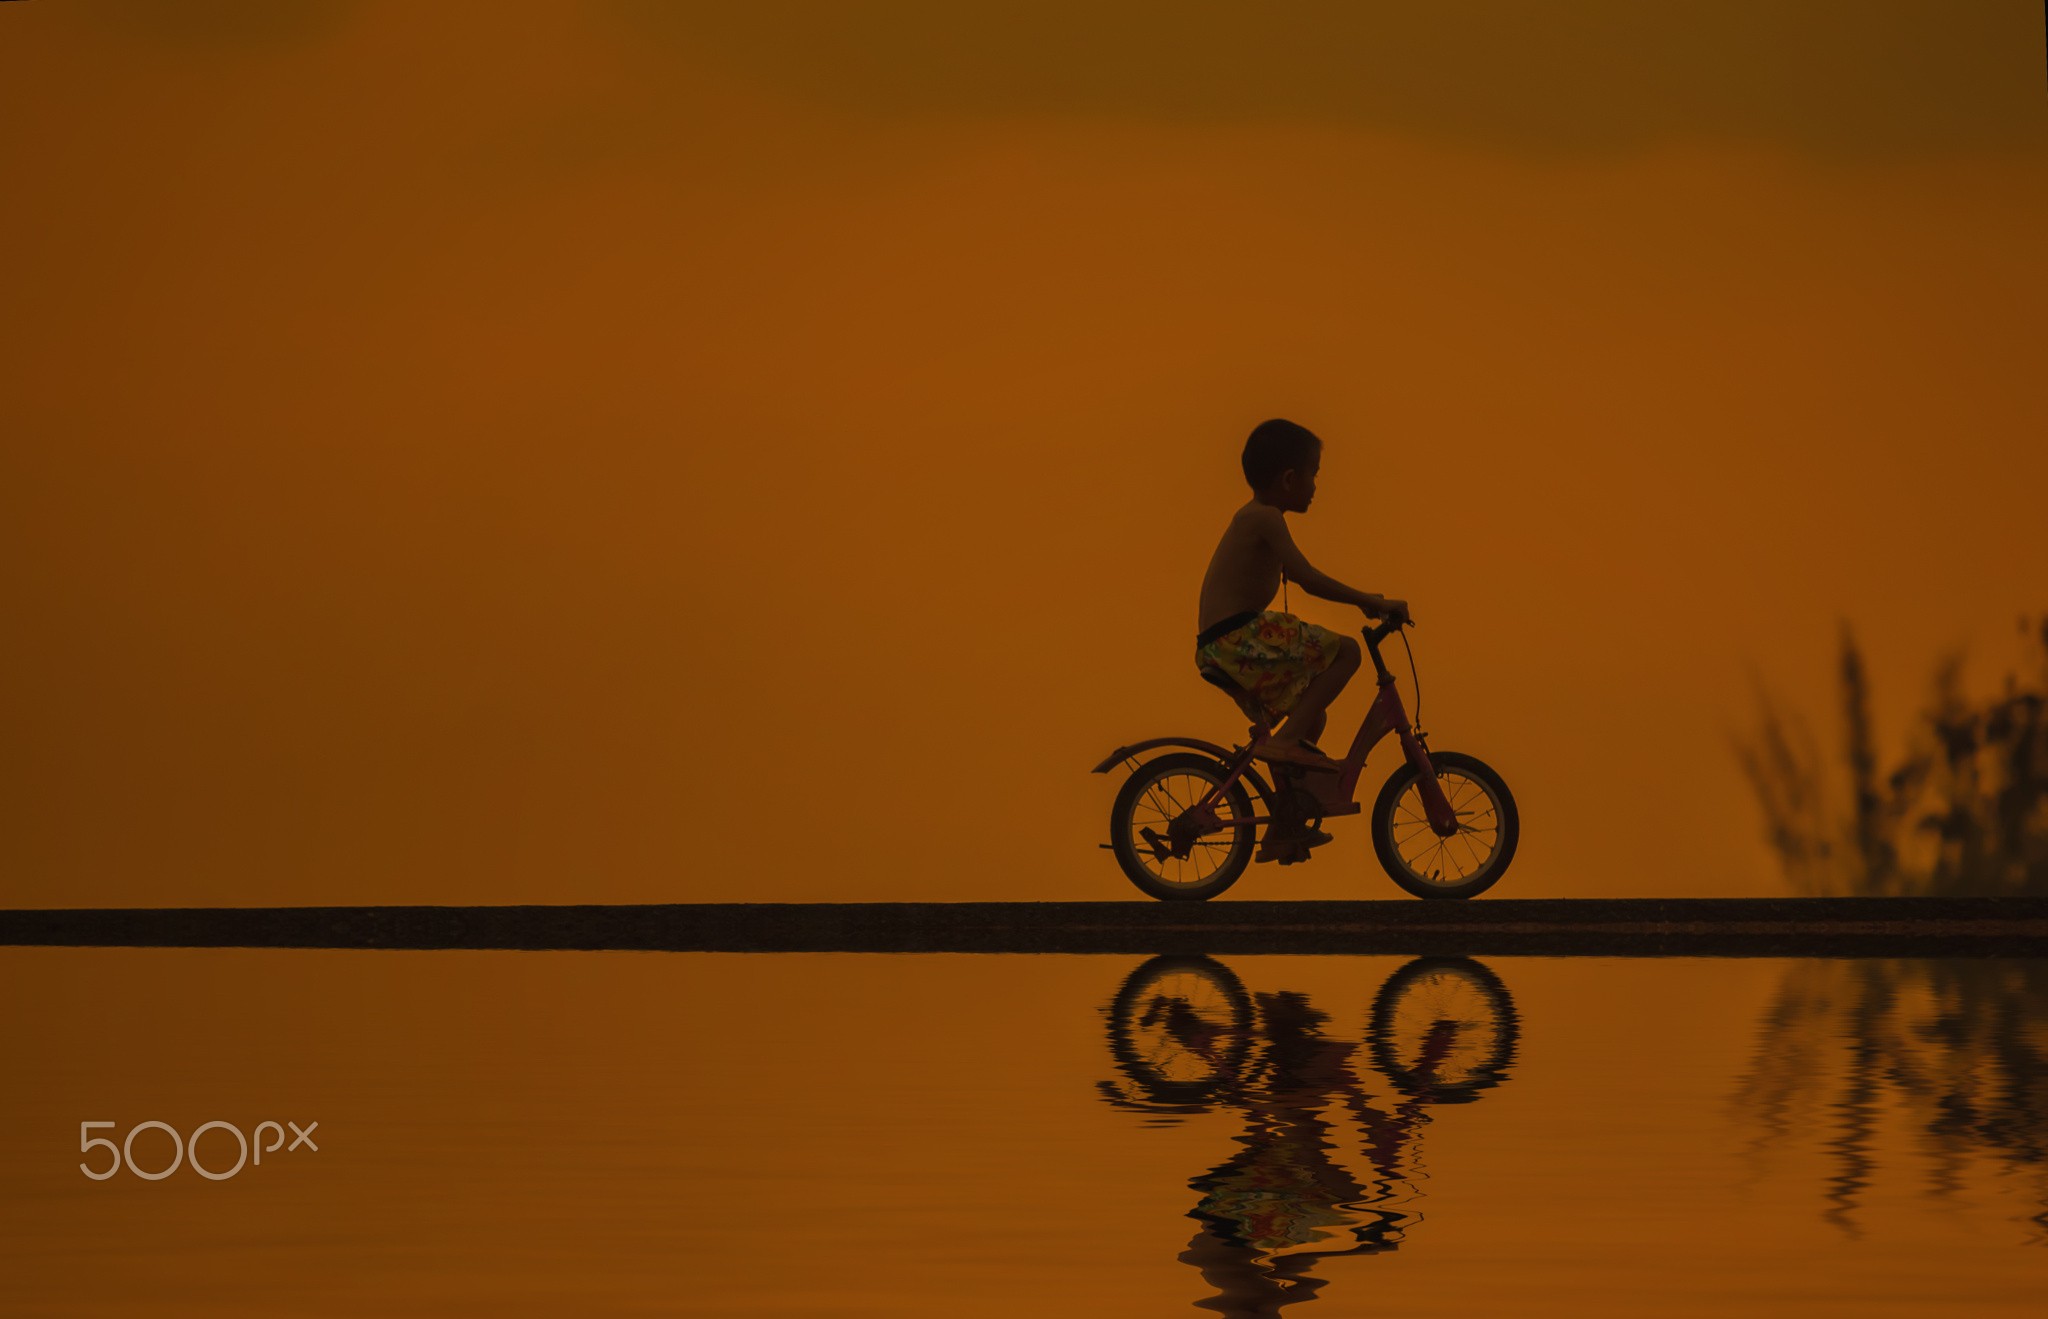 General 2048x1319 children 500px bicycle reflection low light watermarked